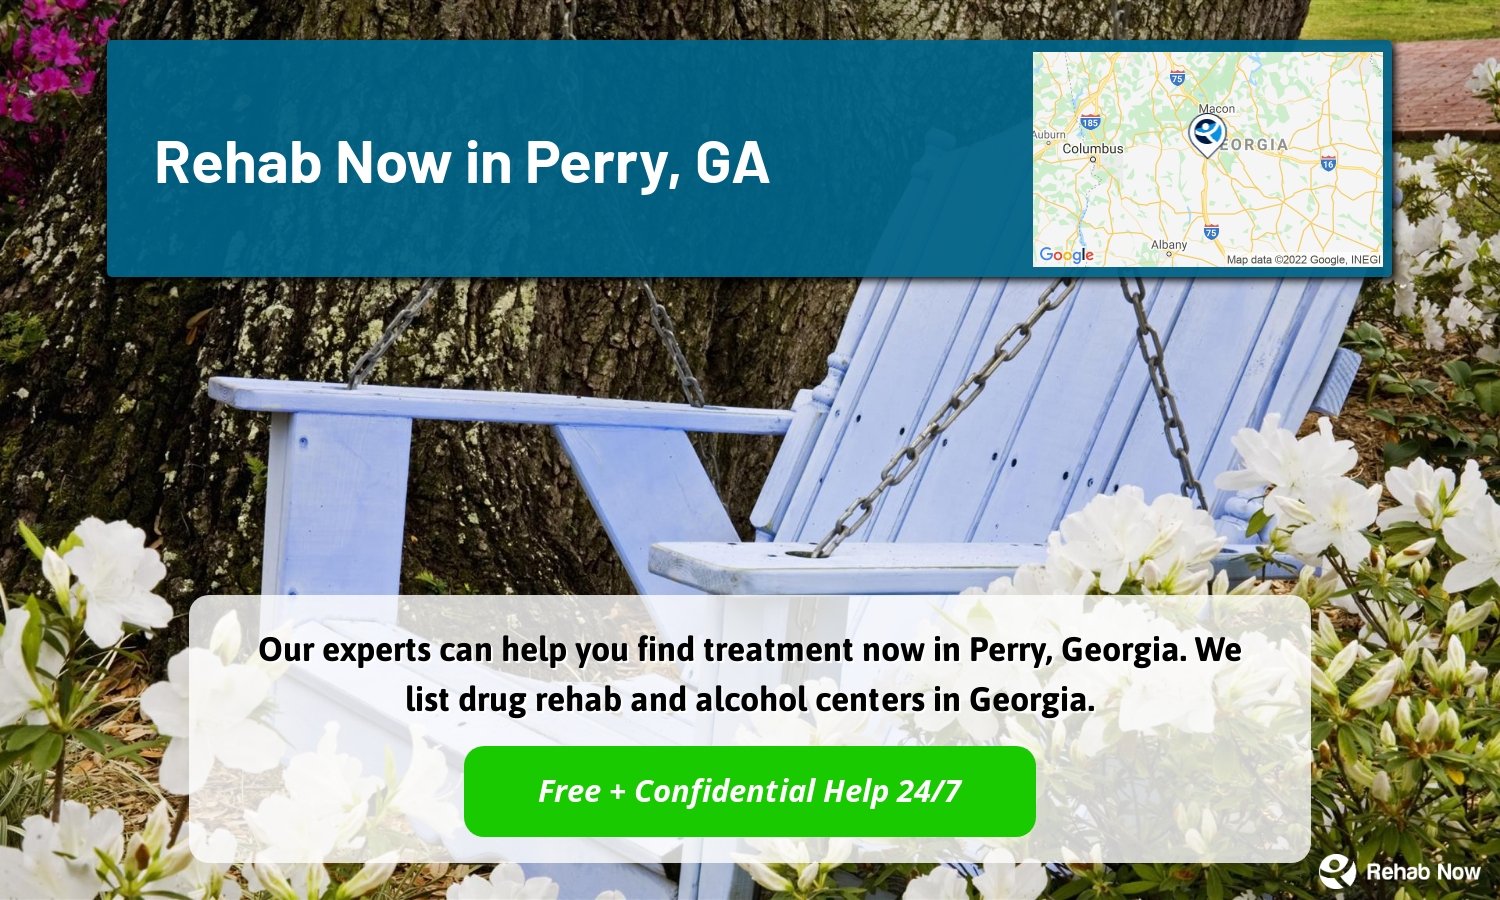 Our experts can help you find treatment now in Perry, Georgia. We list drug rehab and alcohol centers in Georgia.